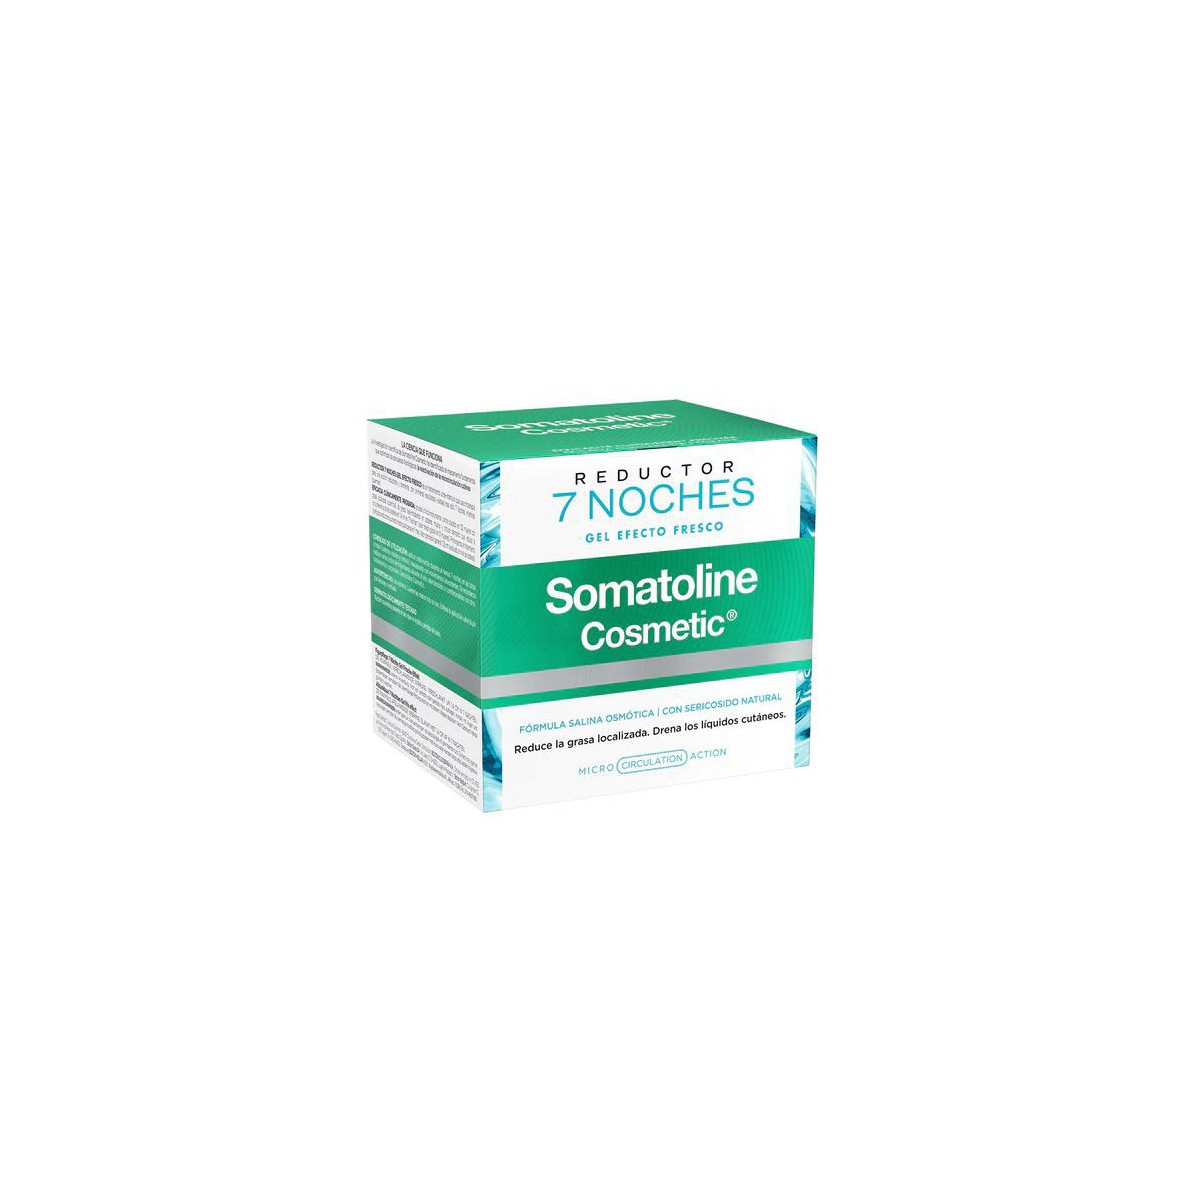 Somatoline Cosmetic Reductor 7 Noches Gel 400ml